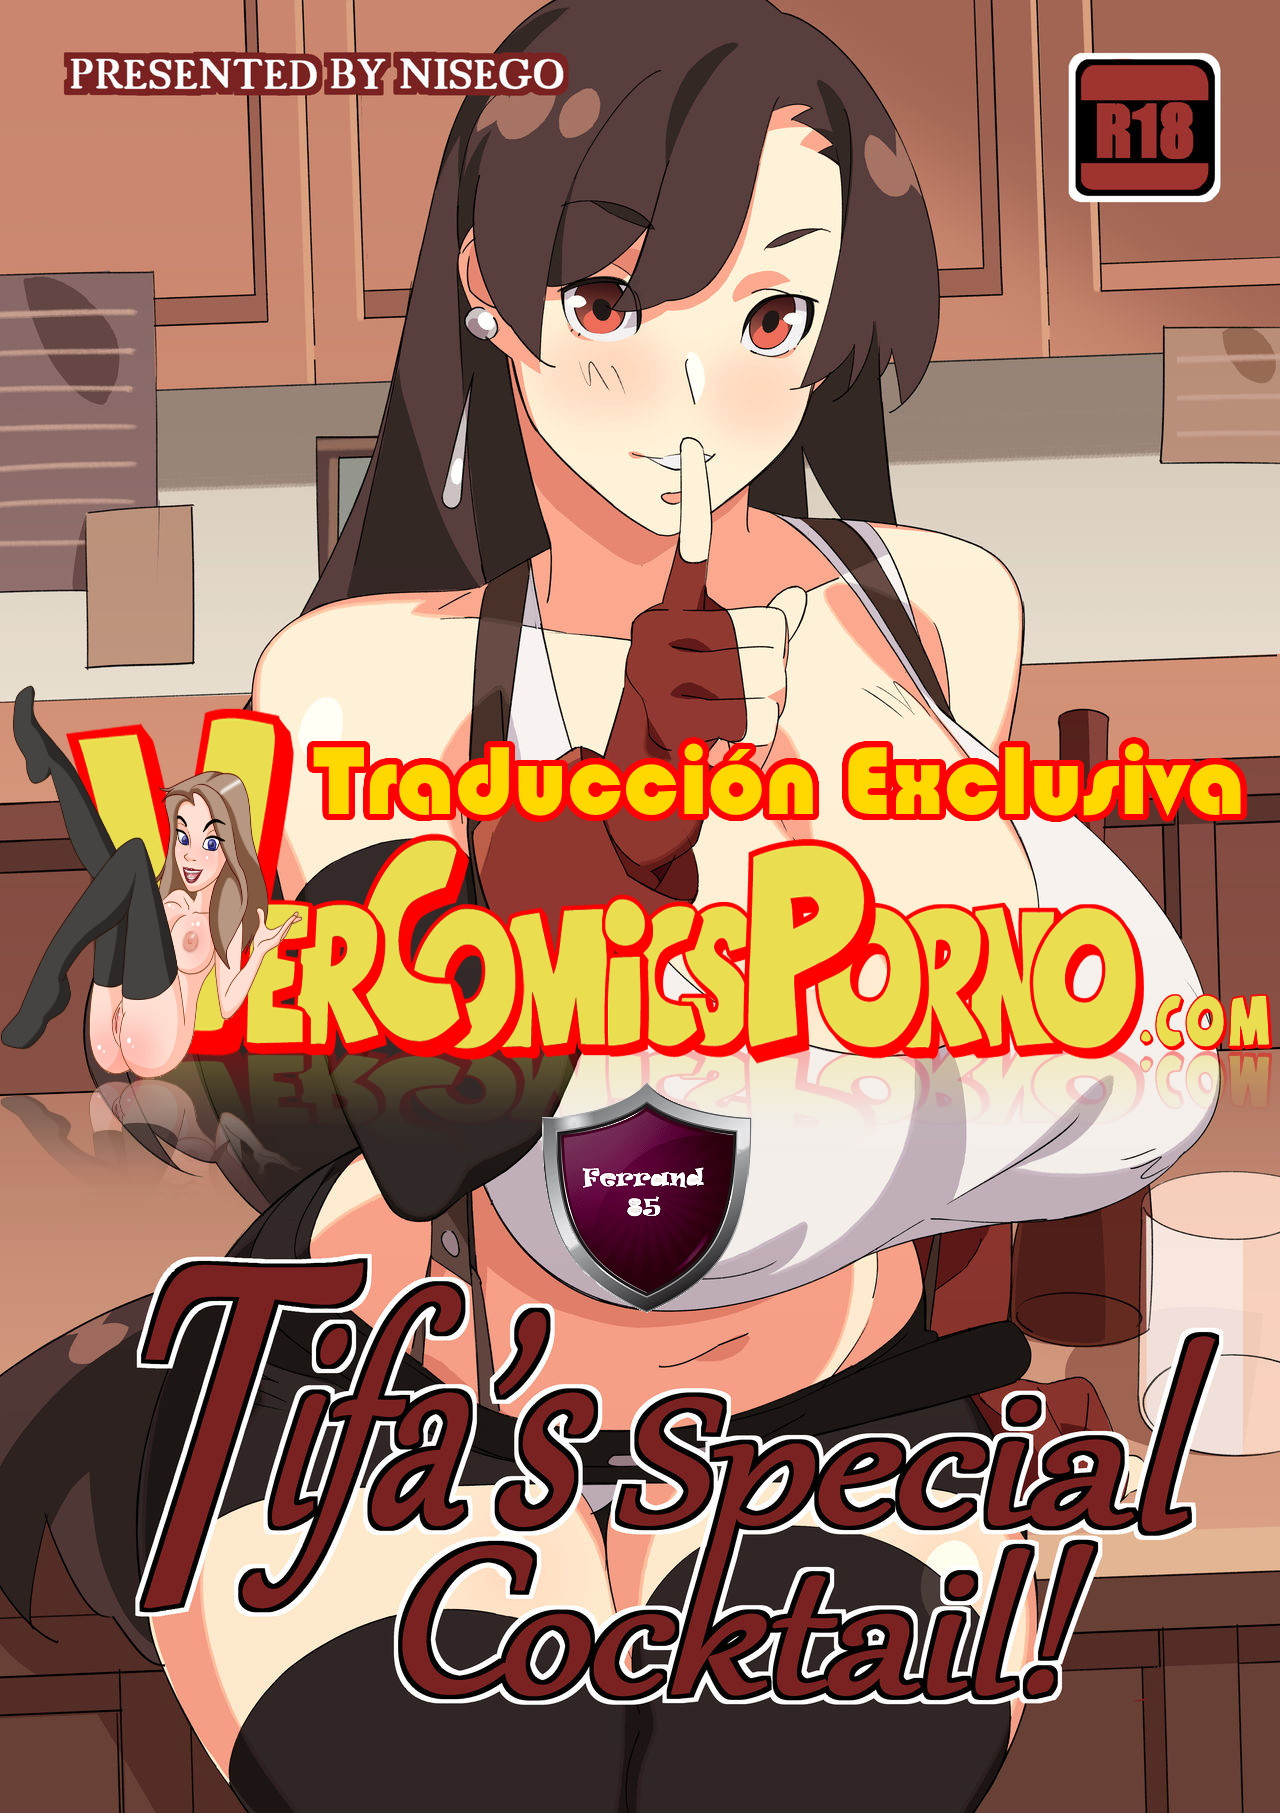 [Nisego] Tifa’s special Cocktail! - 0